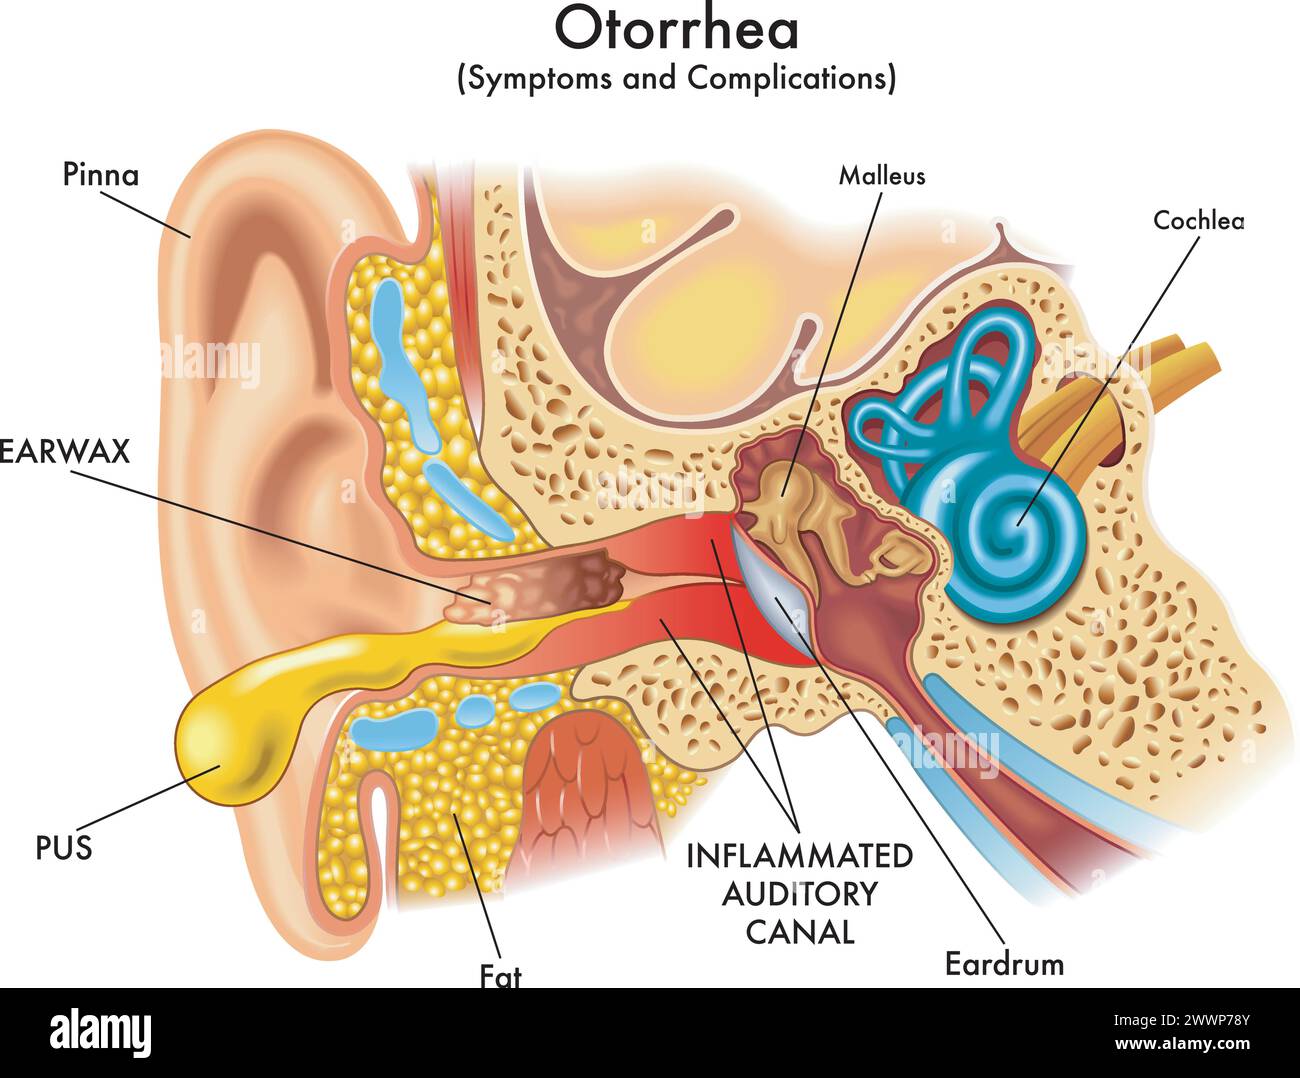 Medical illustration of some symptoms and complications of otorrhea, a pathology that affects the ear, with annotations. Stock Vector